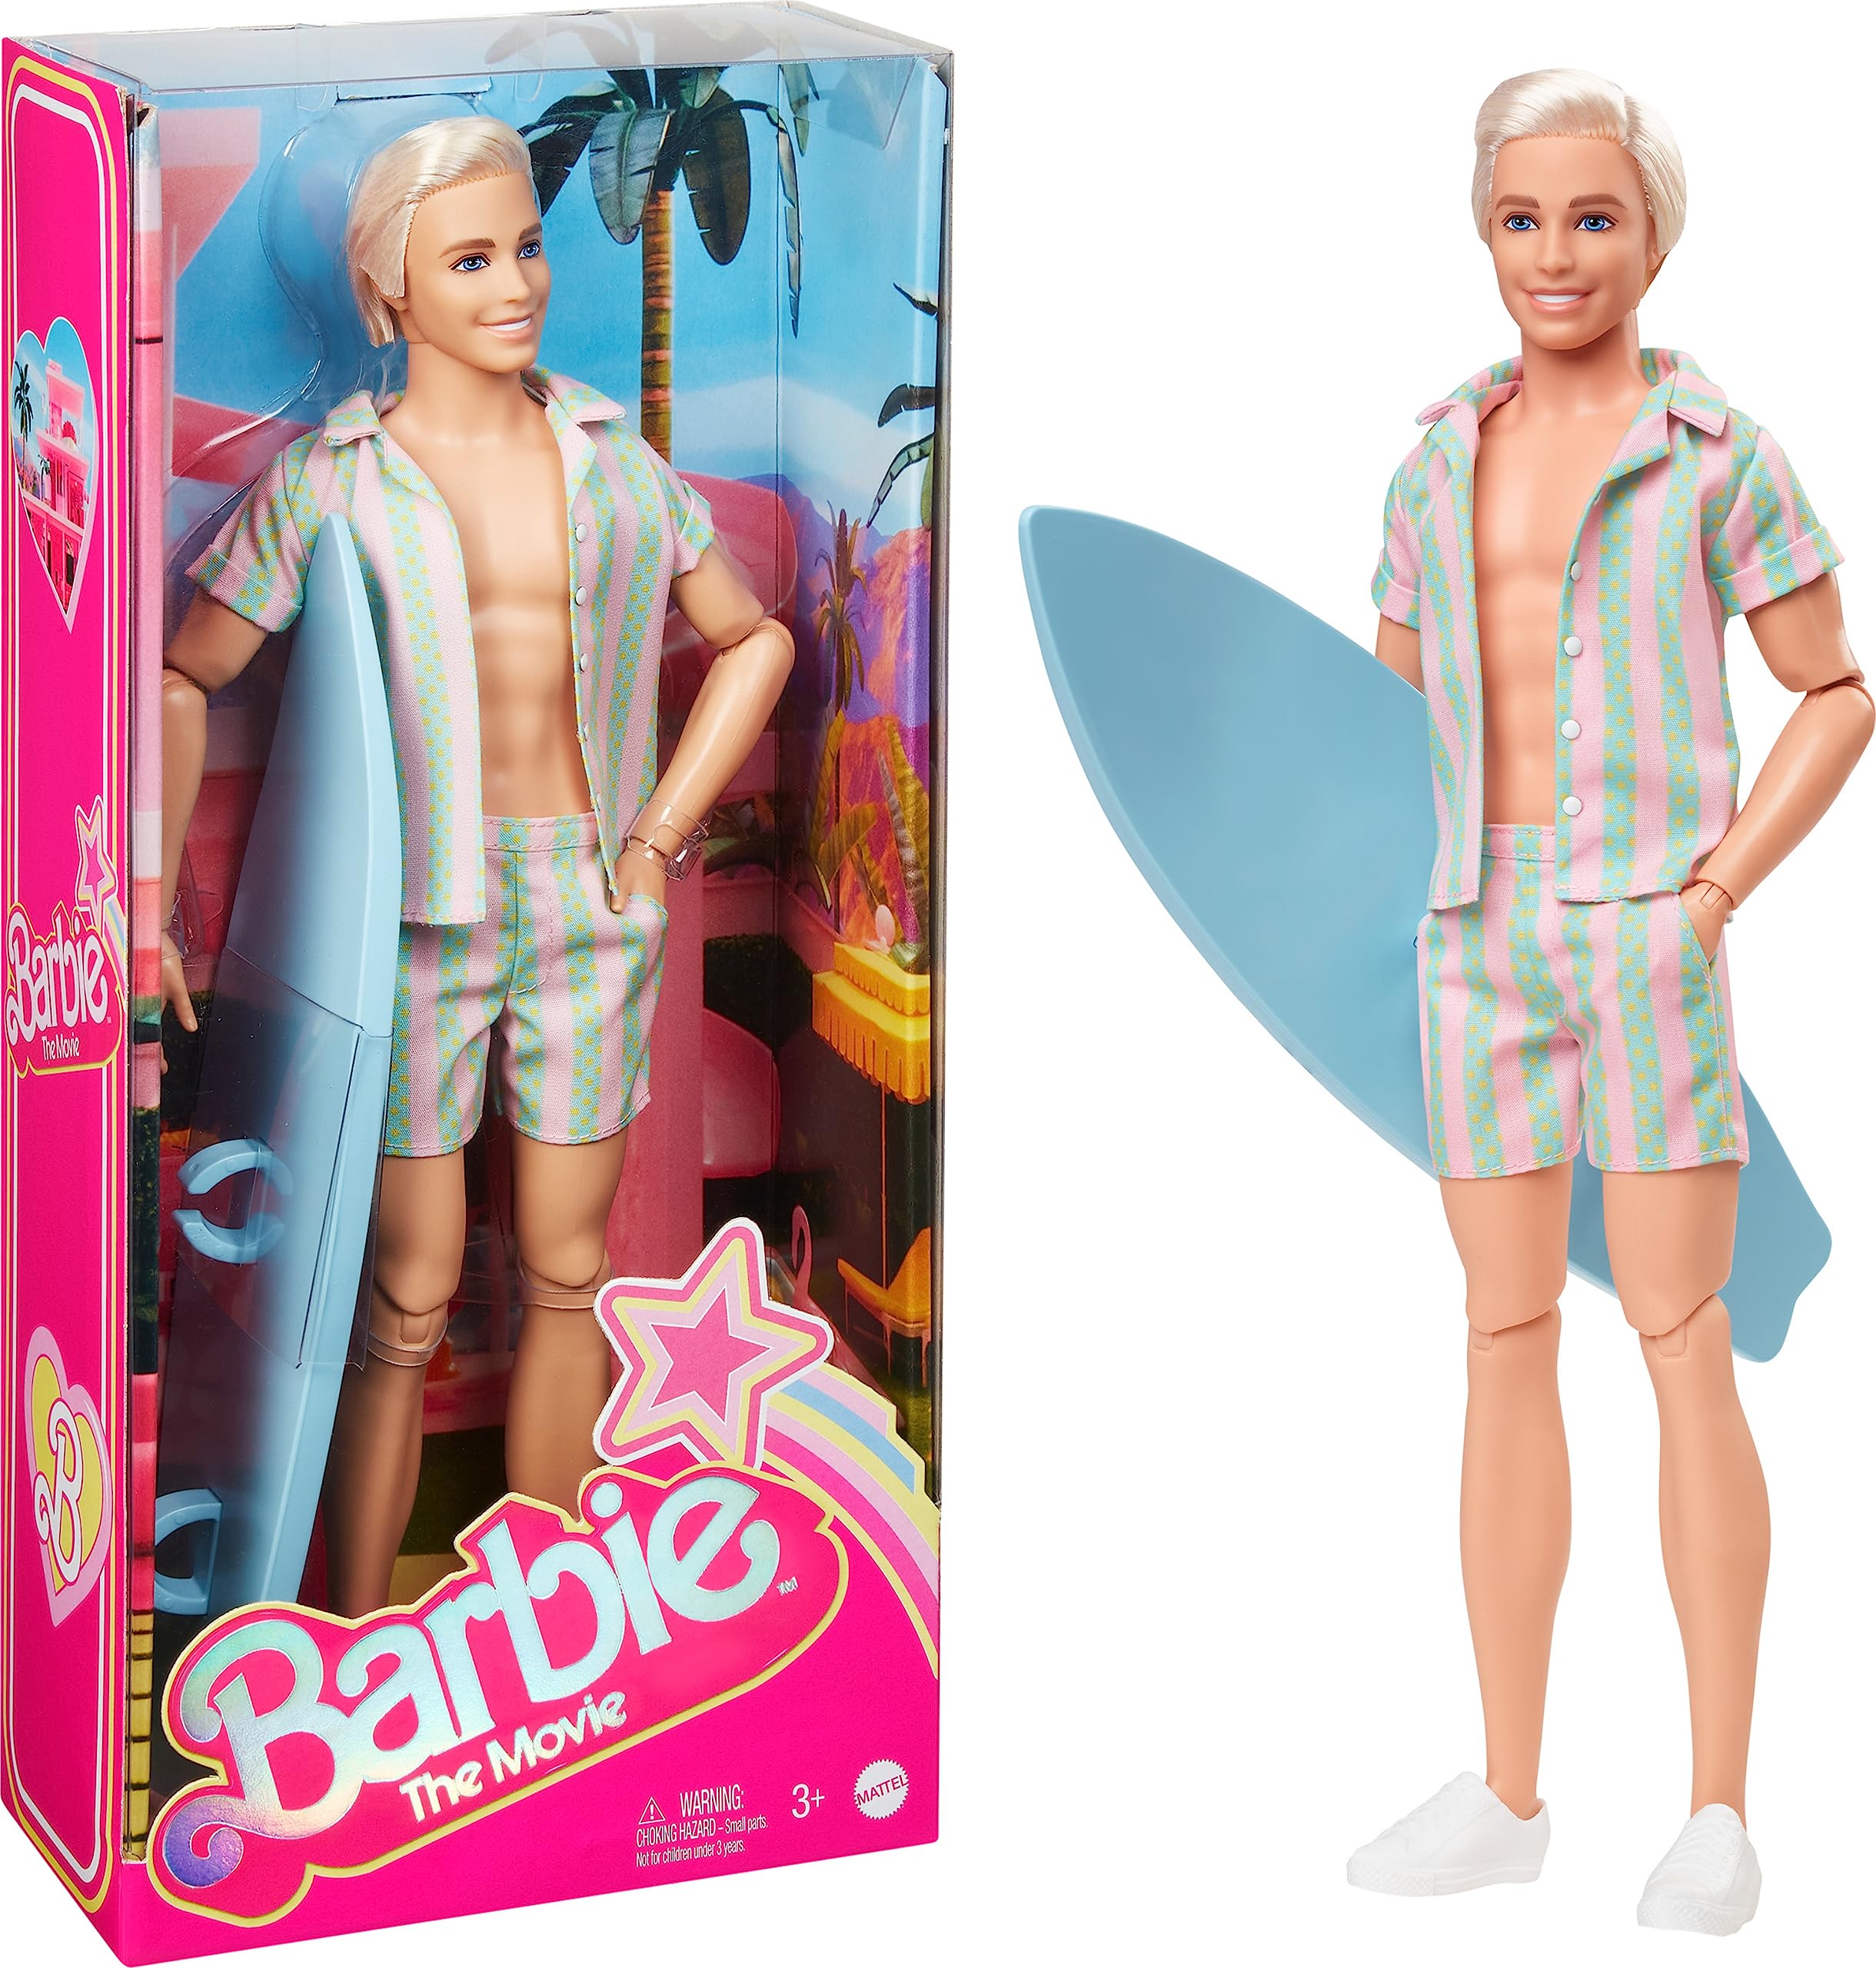 $17.67: Barbie The Movie Ken Doll Wearing Pastel Pink and Green Striped Beach Matching Set with Surfboard and White Sneakers